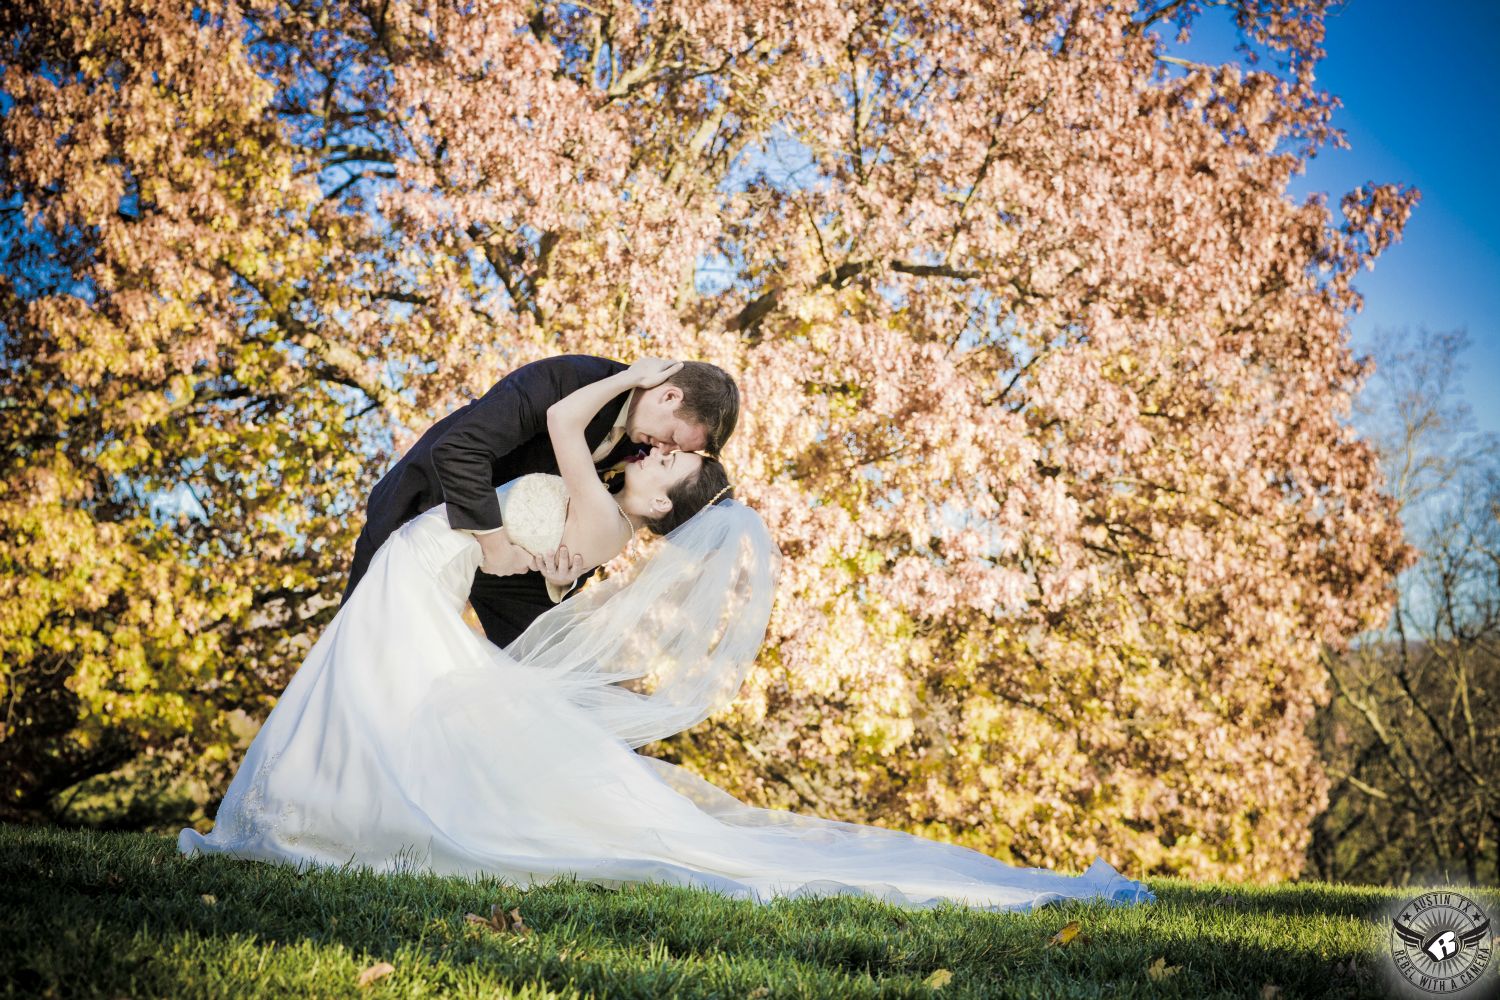 Groom dramatically dips bride in strapless wedding dress in front of large oak tree with gorgeous orange and yellow colored fall leaves in autumn after their wedding ceremony.